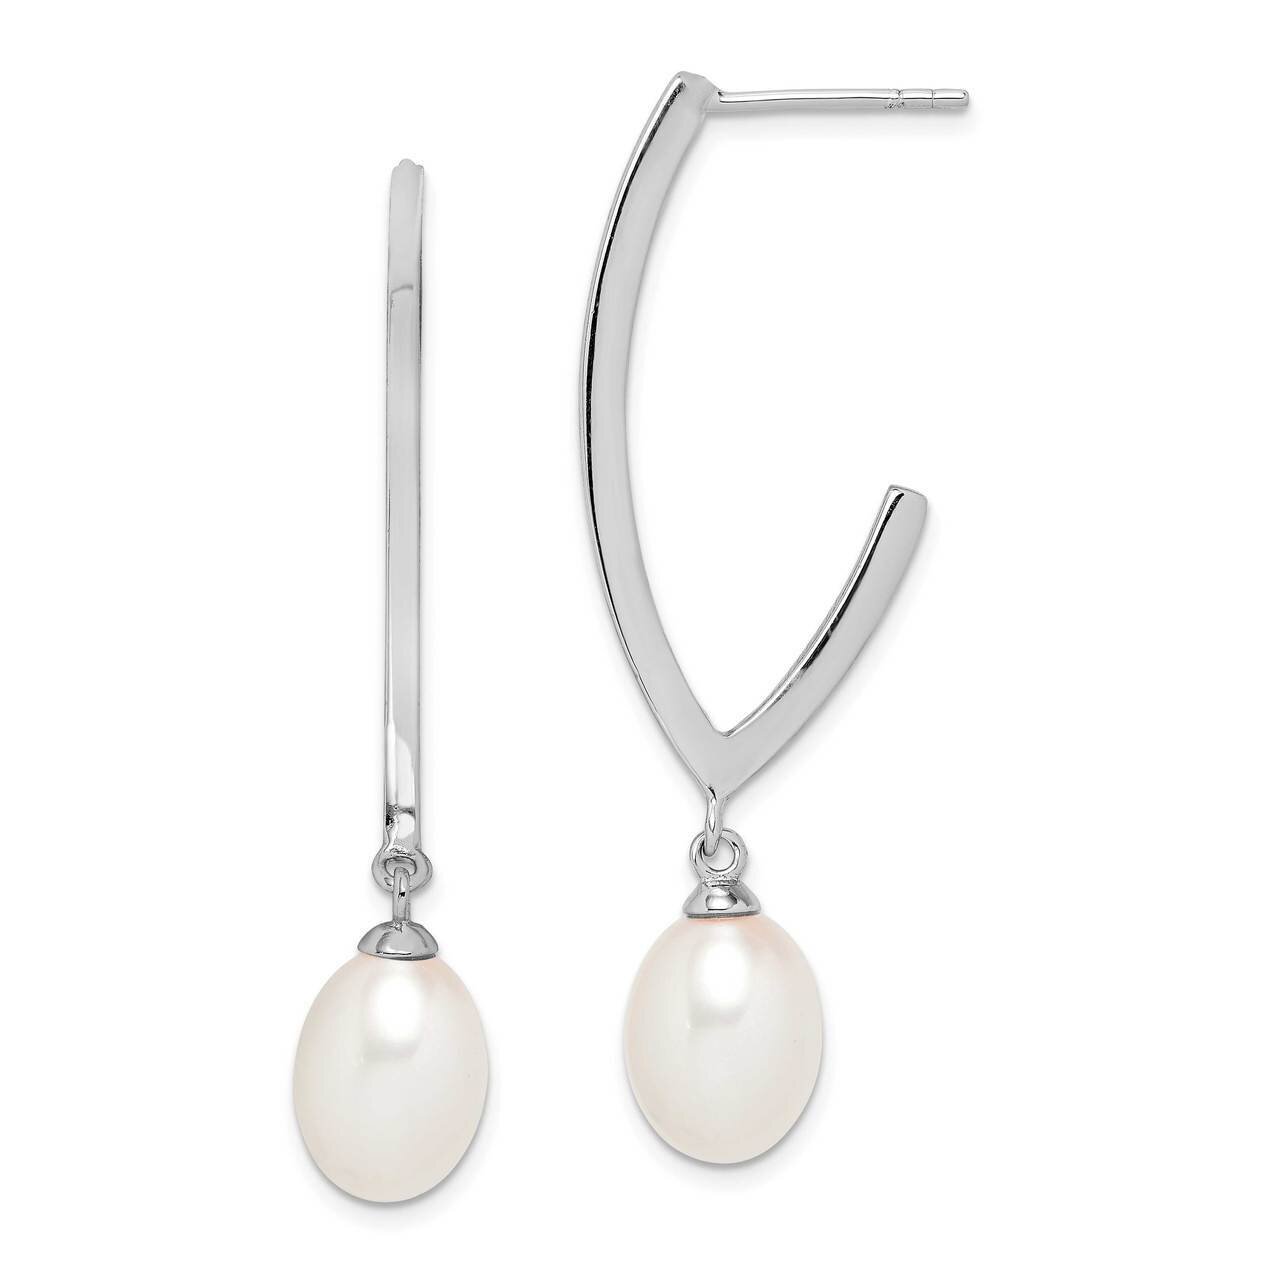 8-9mm White Rice Freshwater Cultured Pearl Earrings Sterling Silver Rhodium Plated QE15124